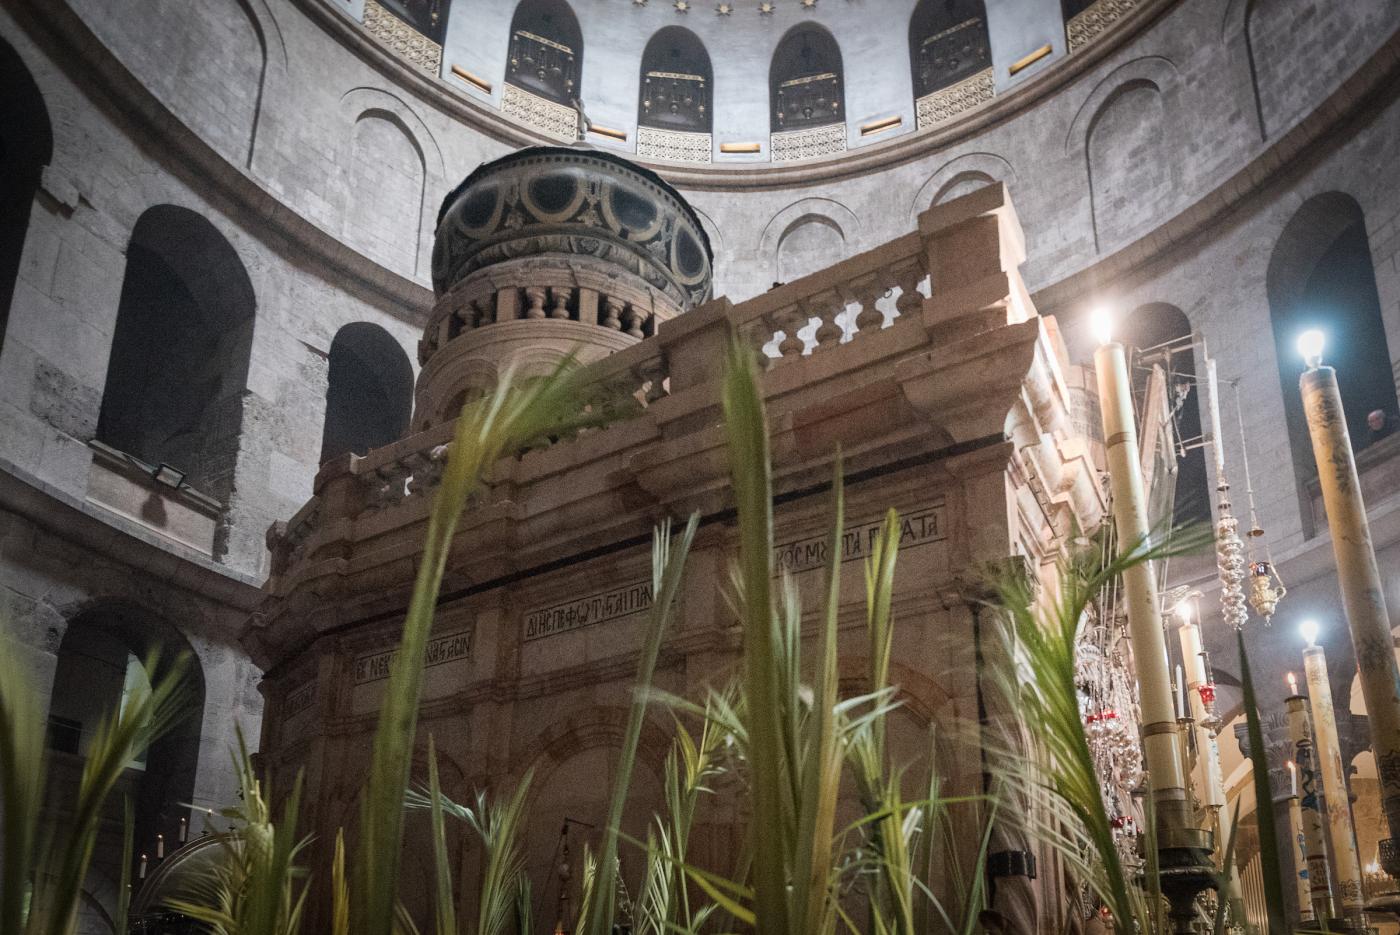 Tomb in the Church of the Holy Sepulchre, Jerusalem, 2019